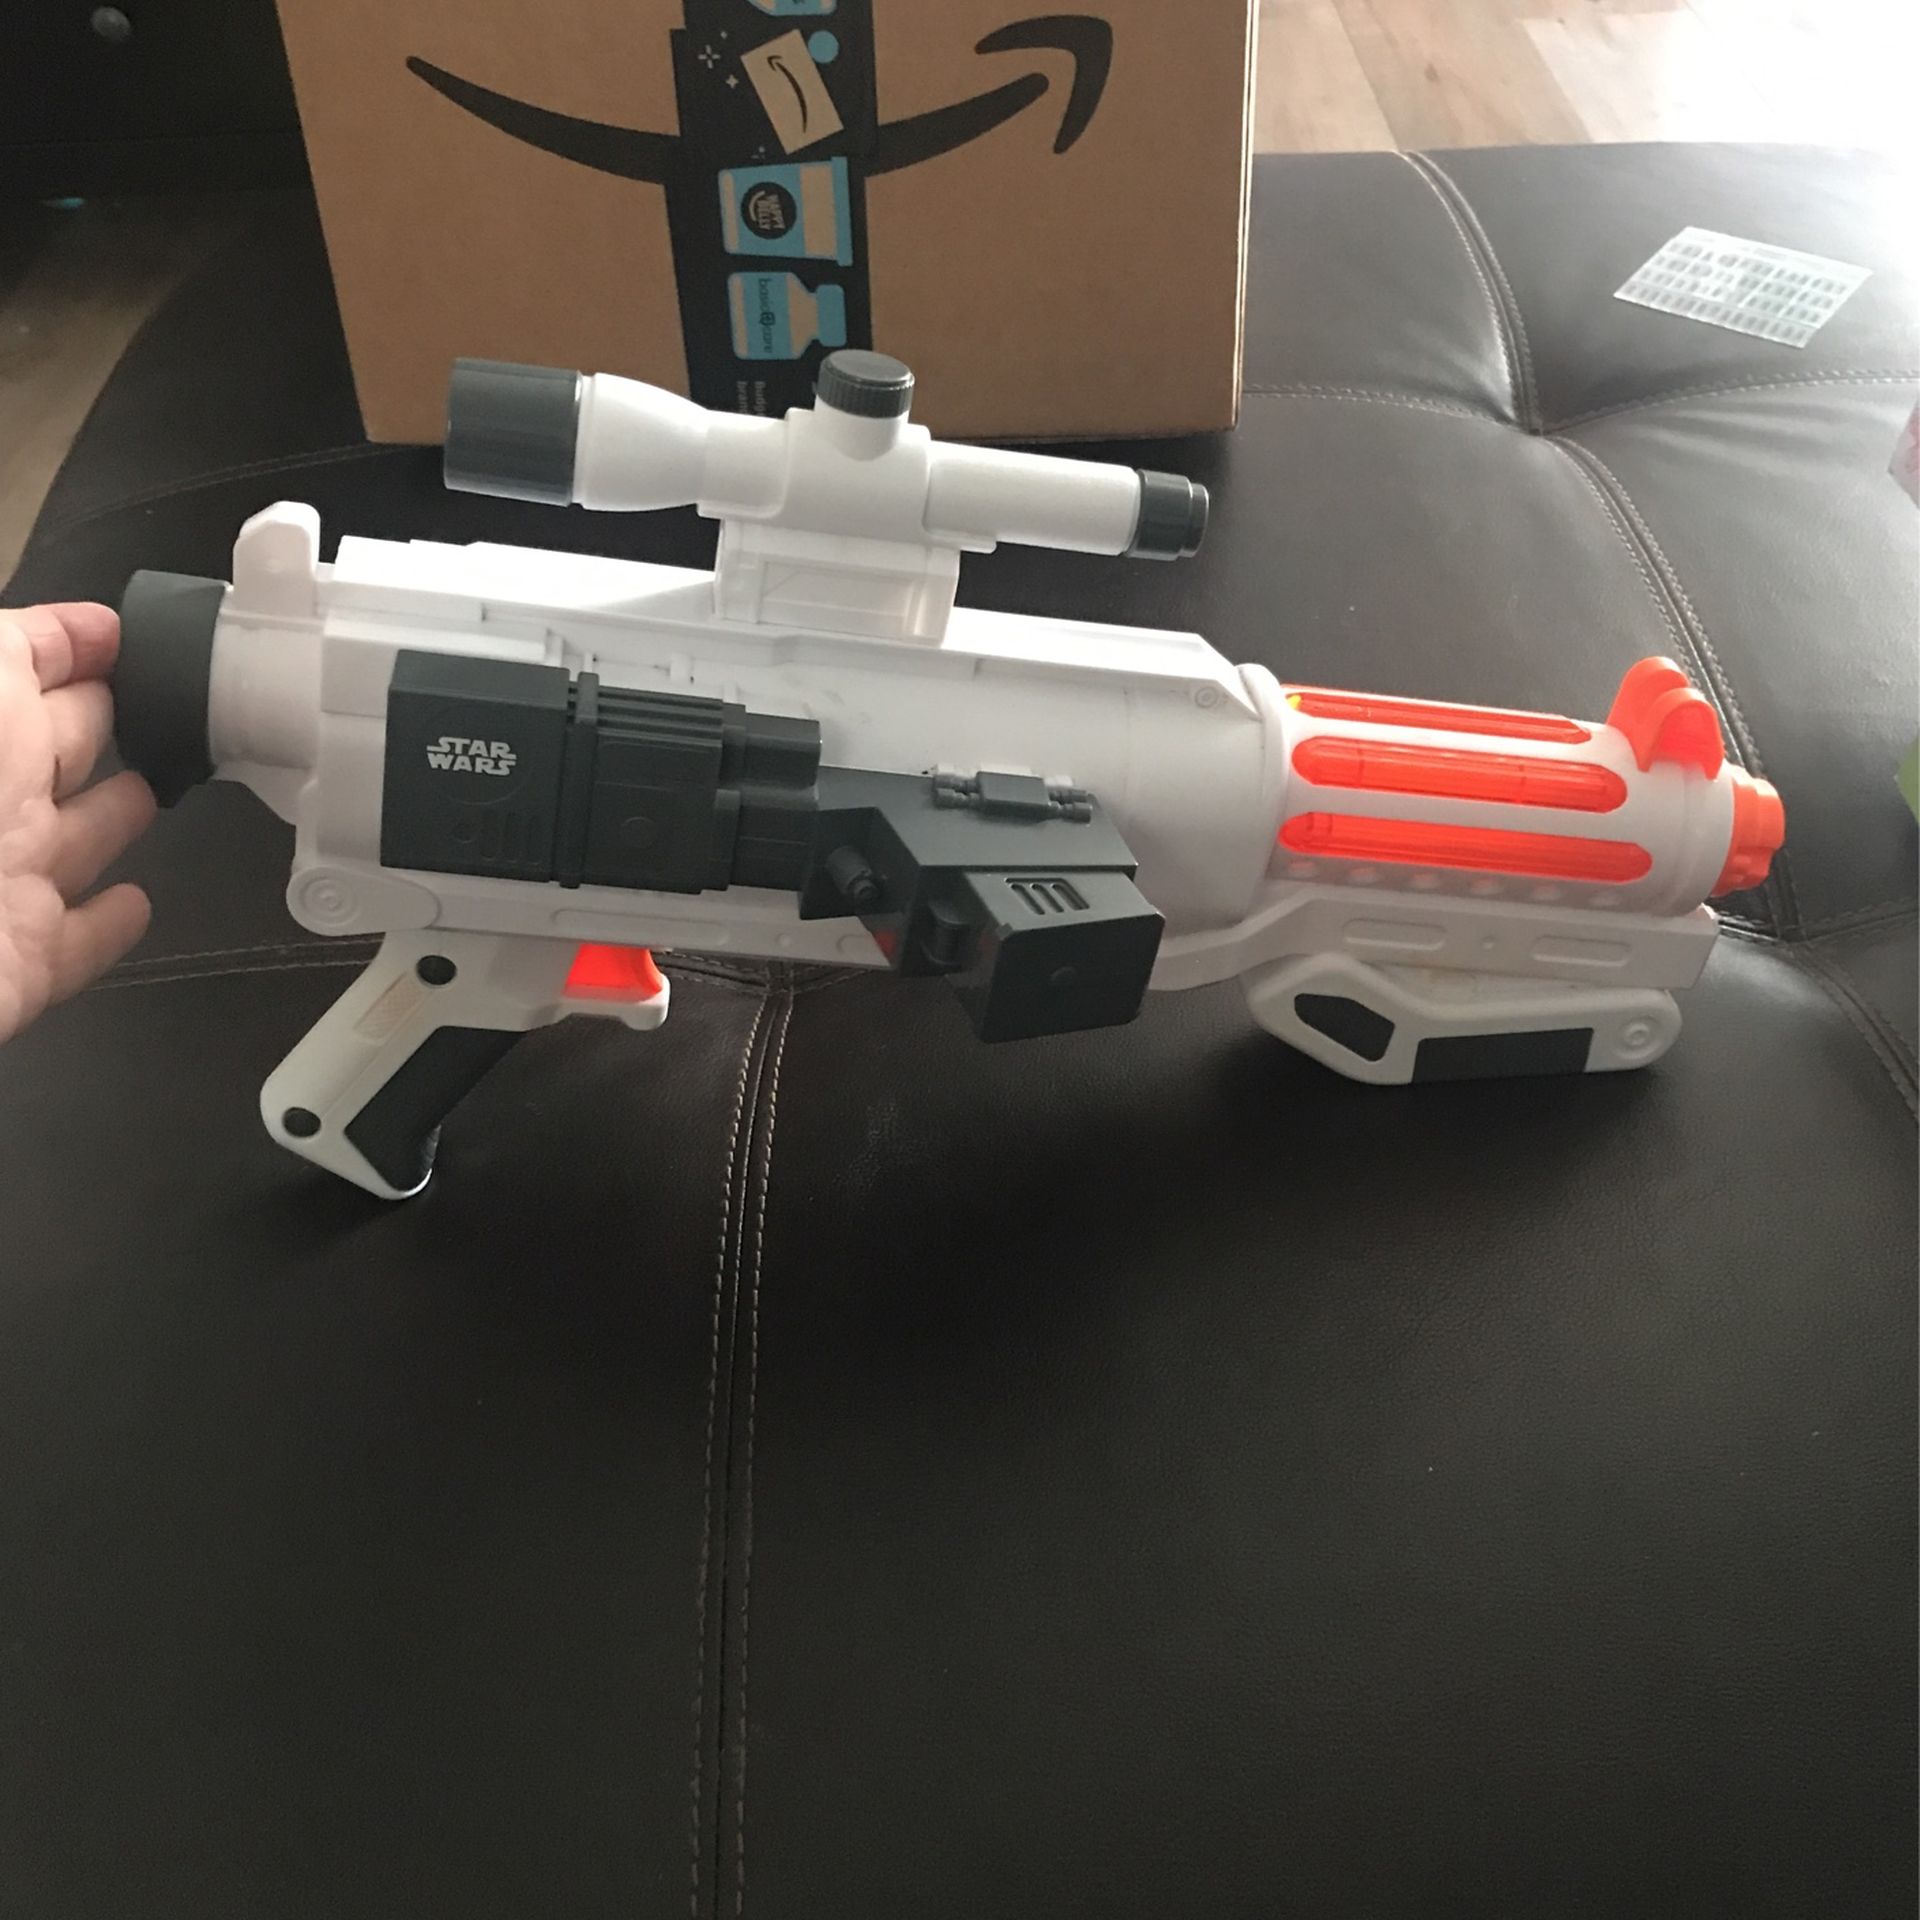 Star Wars Nerf Gun With Site And Trigger Lights And Sound And Holds 6 Foam Bullets